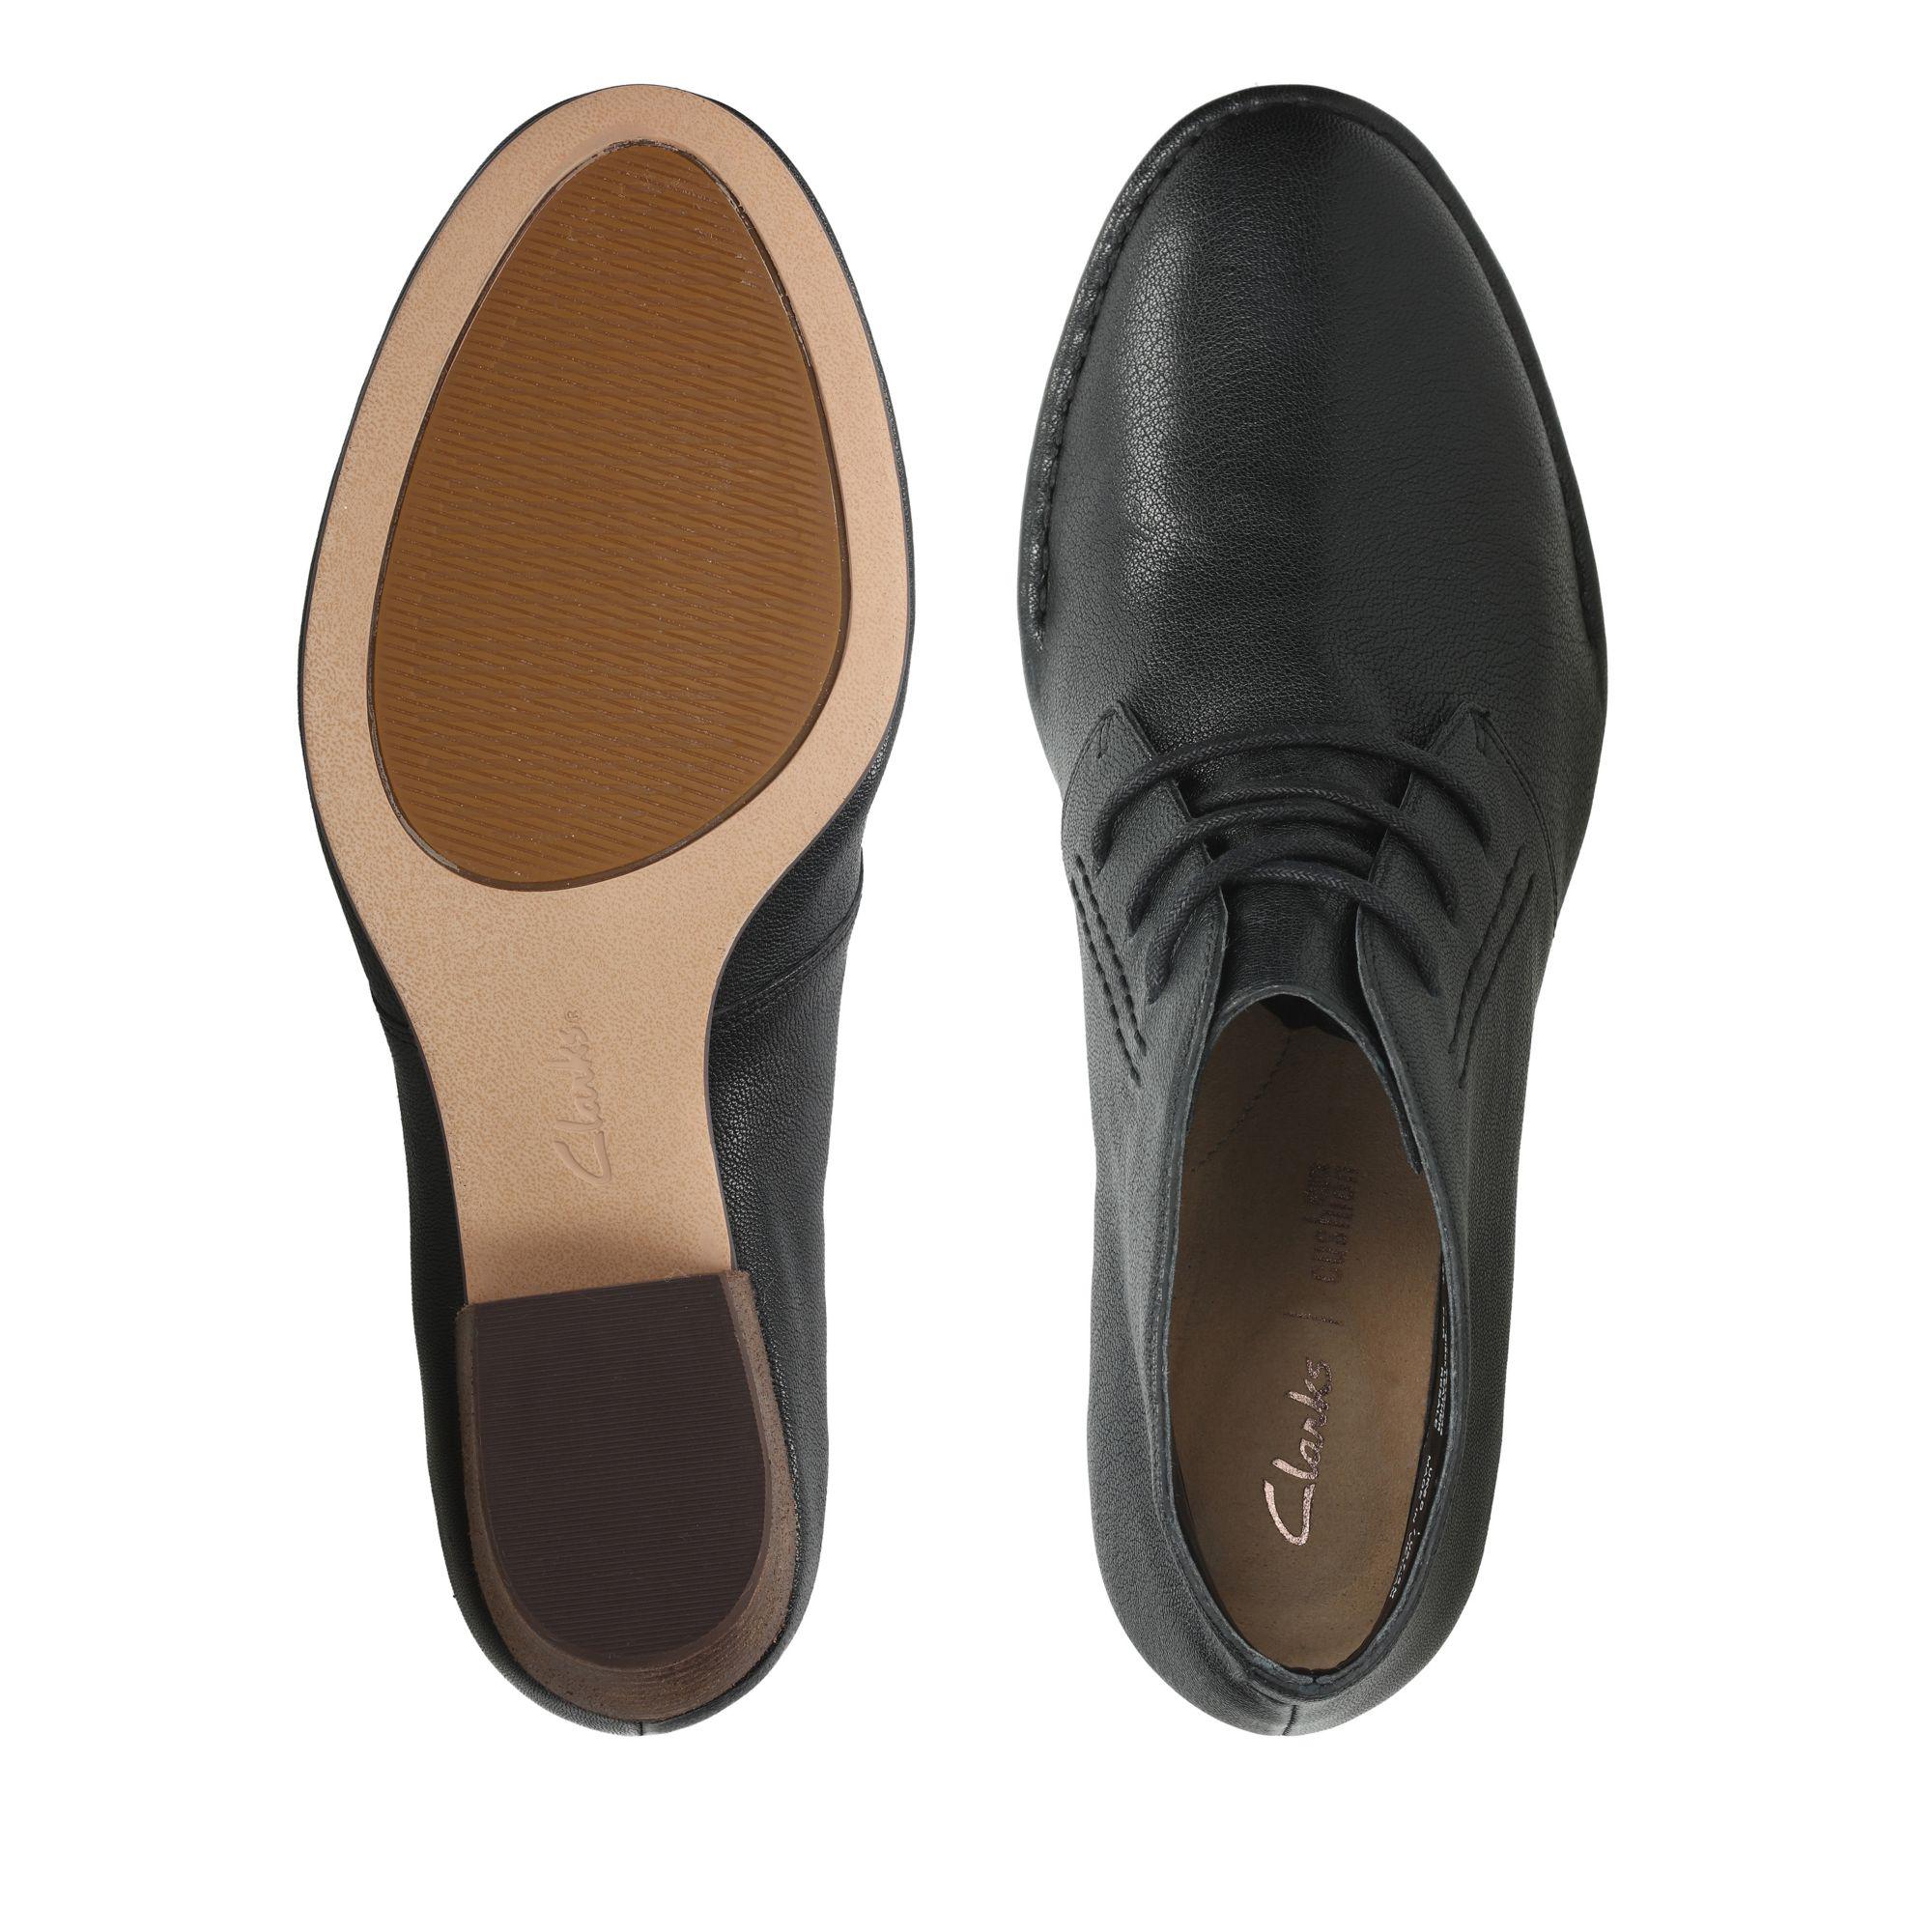 Clarks Leather Spiced Charm in Black 